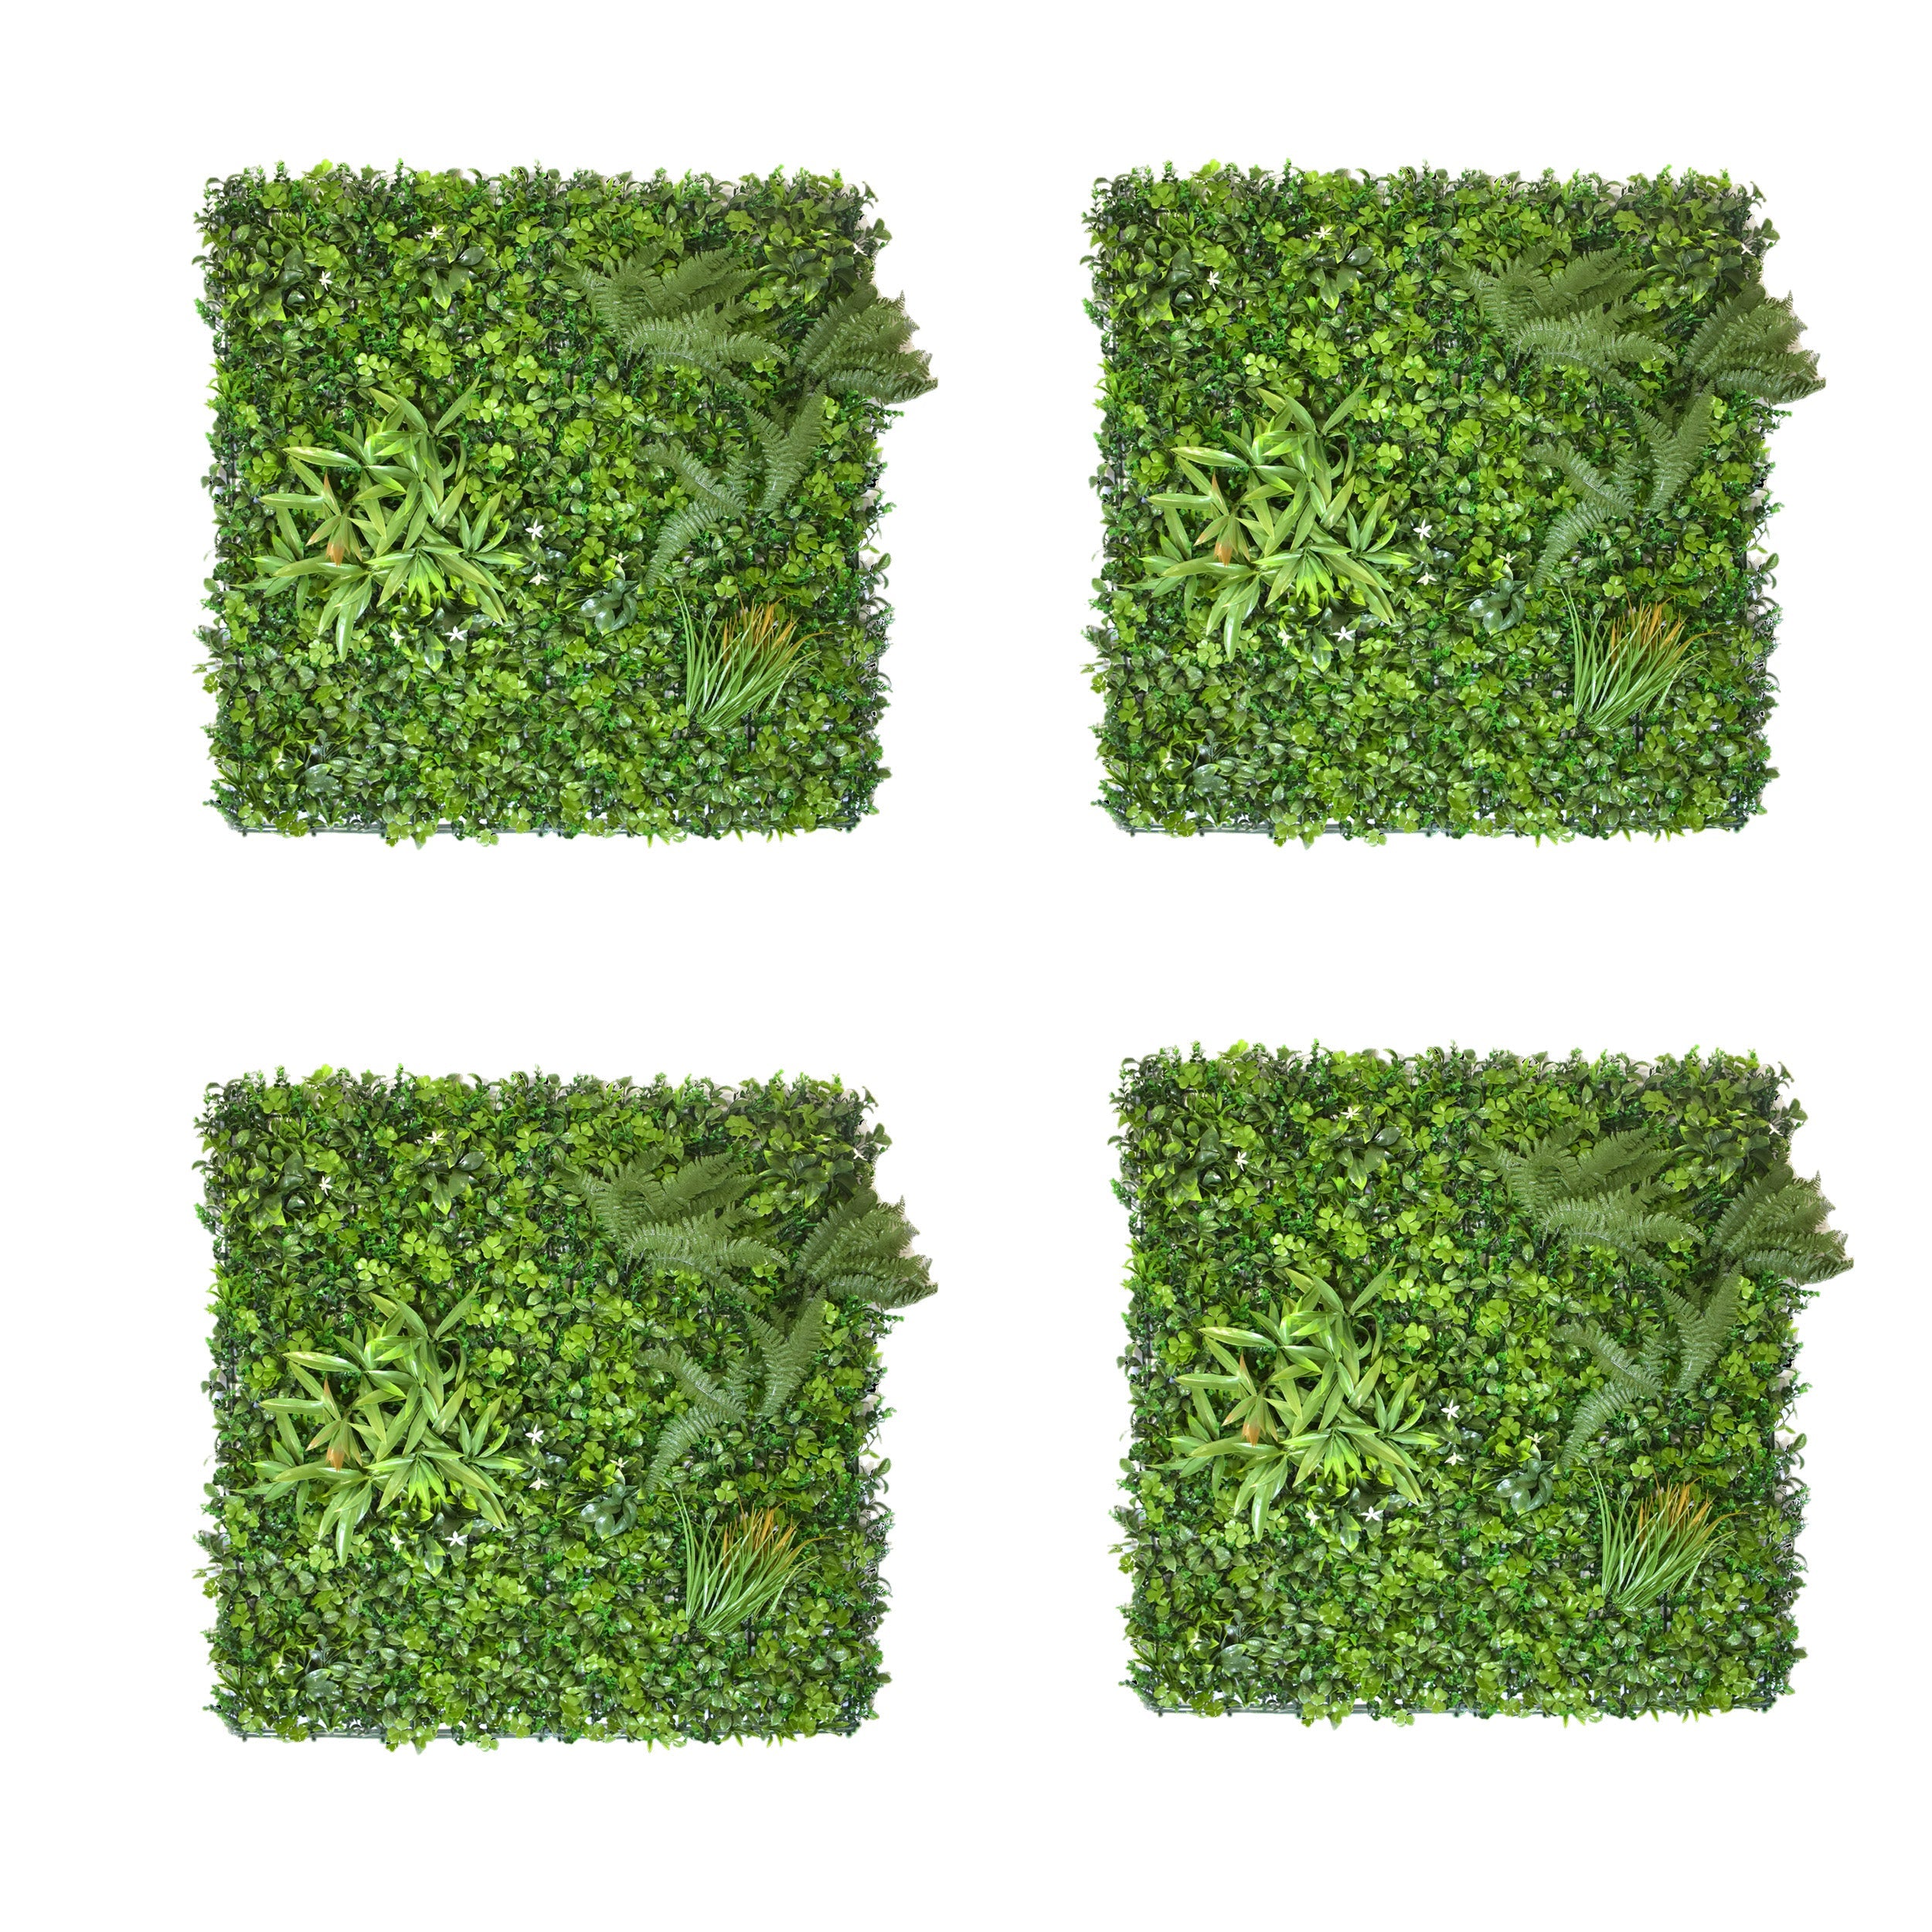 Aavana Greens Artificial Vertical Garden Wall Panel 100X100 CM For Home & Office Decoration 100% UV Indoor And Outdoor Use Option 22